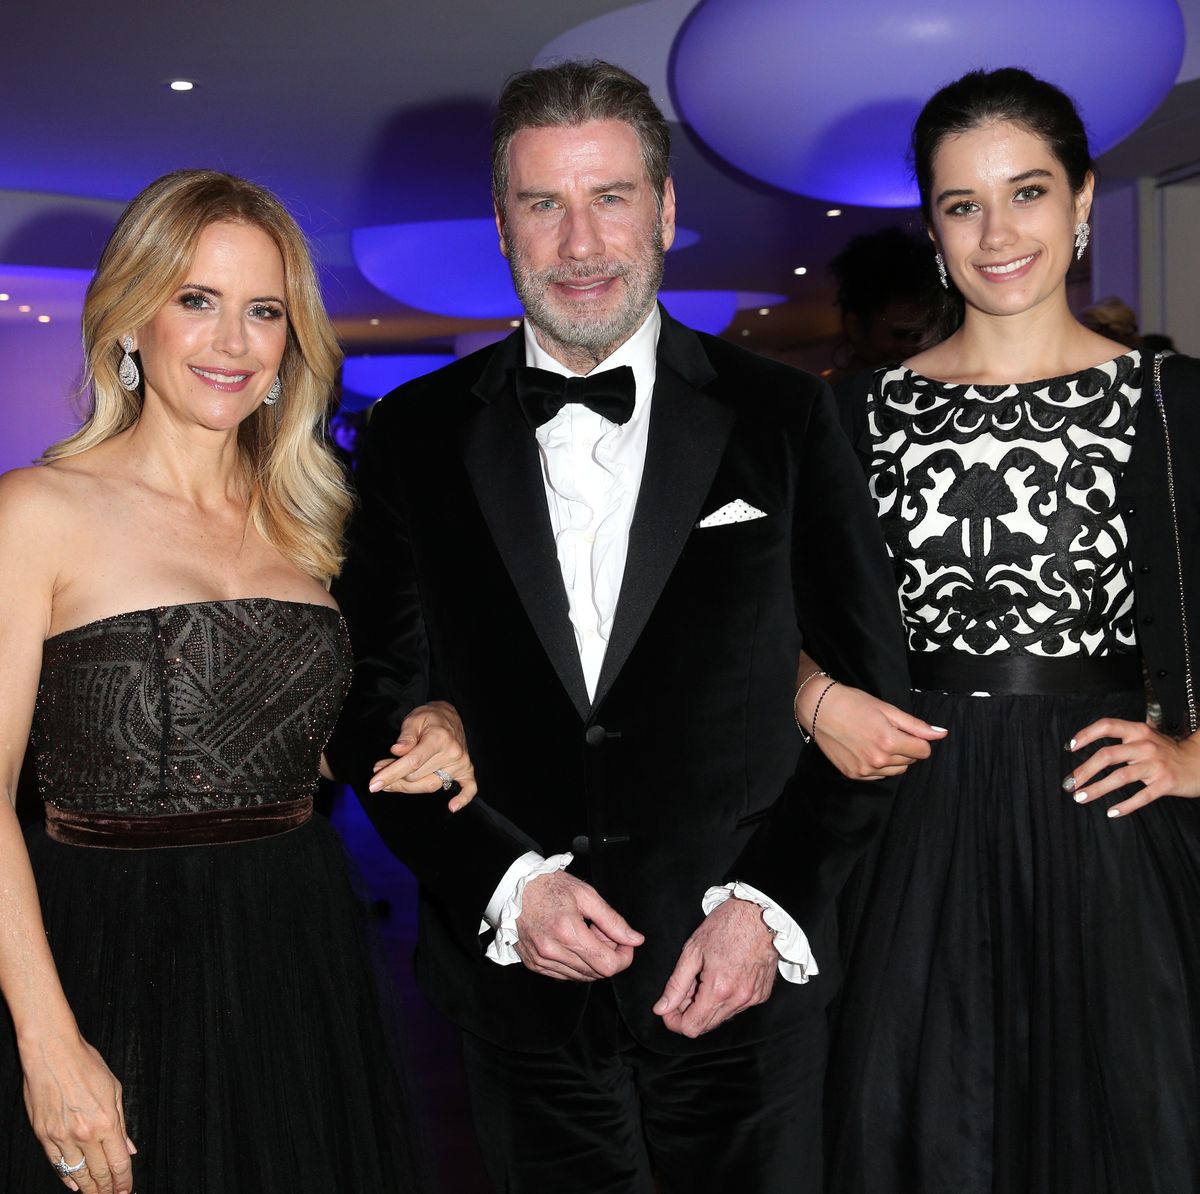 party in honour of john travolta's receipt of the inaugural variety cinema icon award   the 71st annual cannes film festival